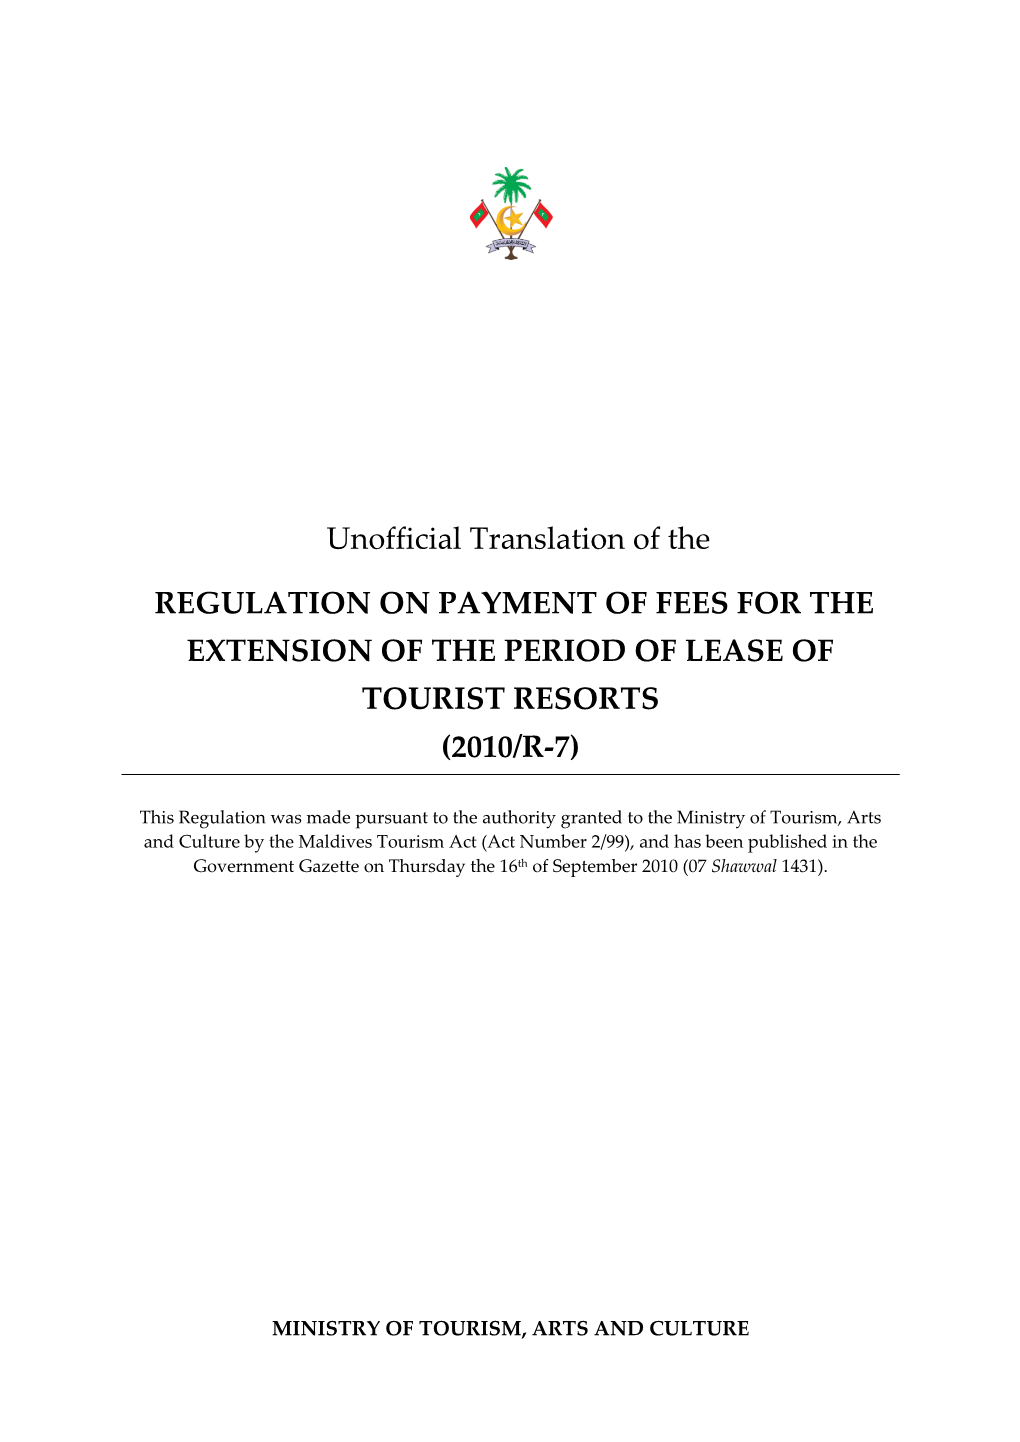 Regulation on Payment of Fees for the Extension of the Period of Lease of Tourist Resorts (2010/R-7)